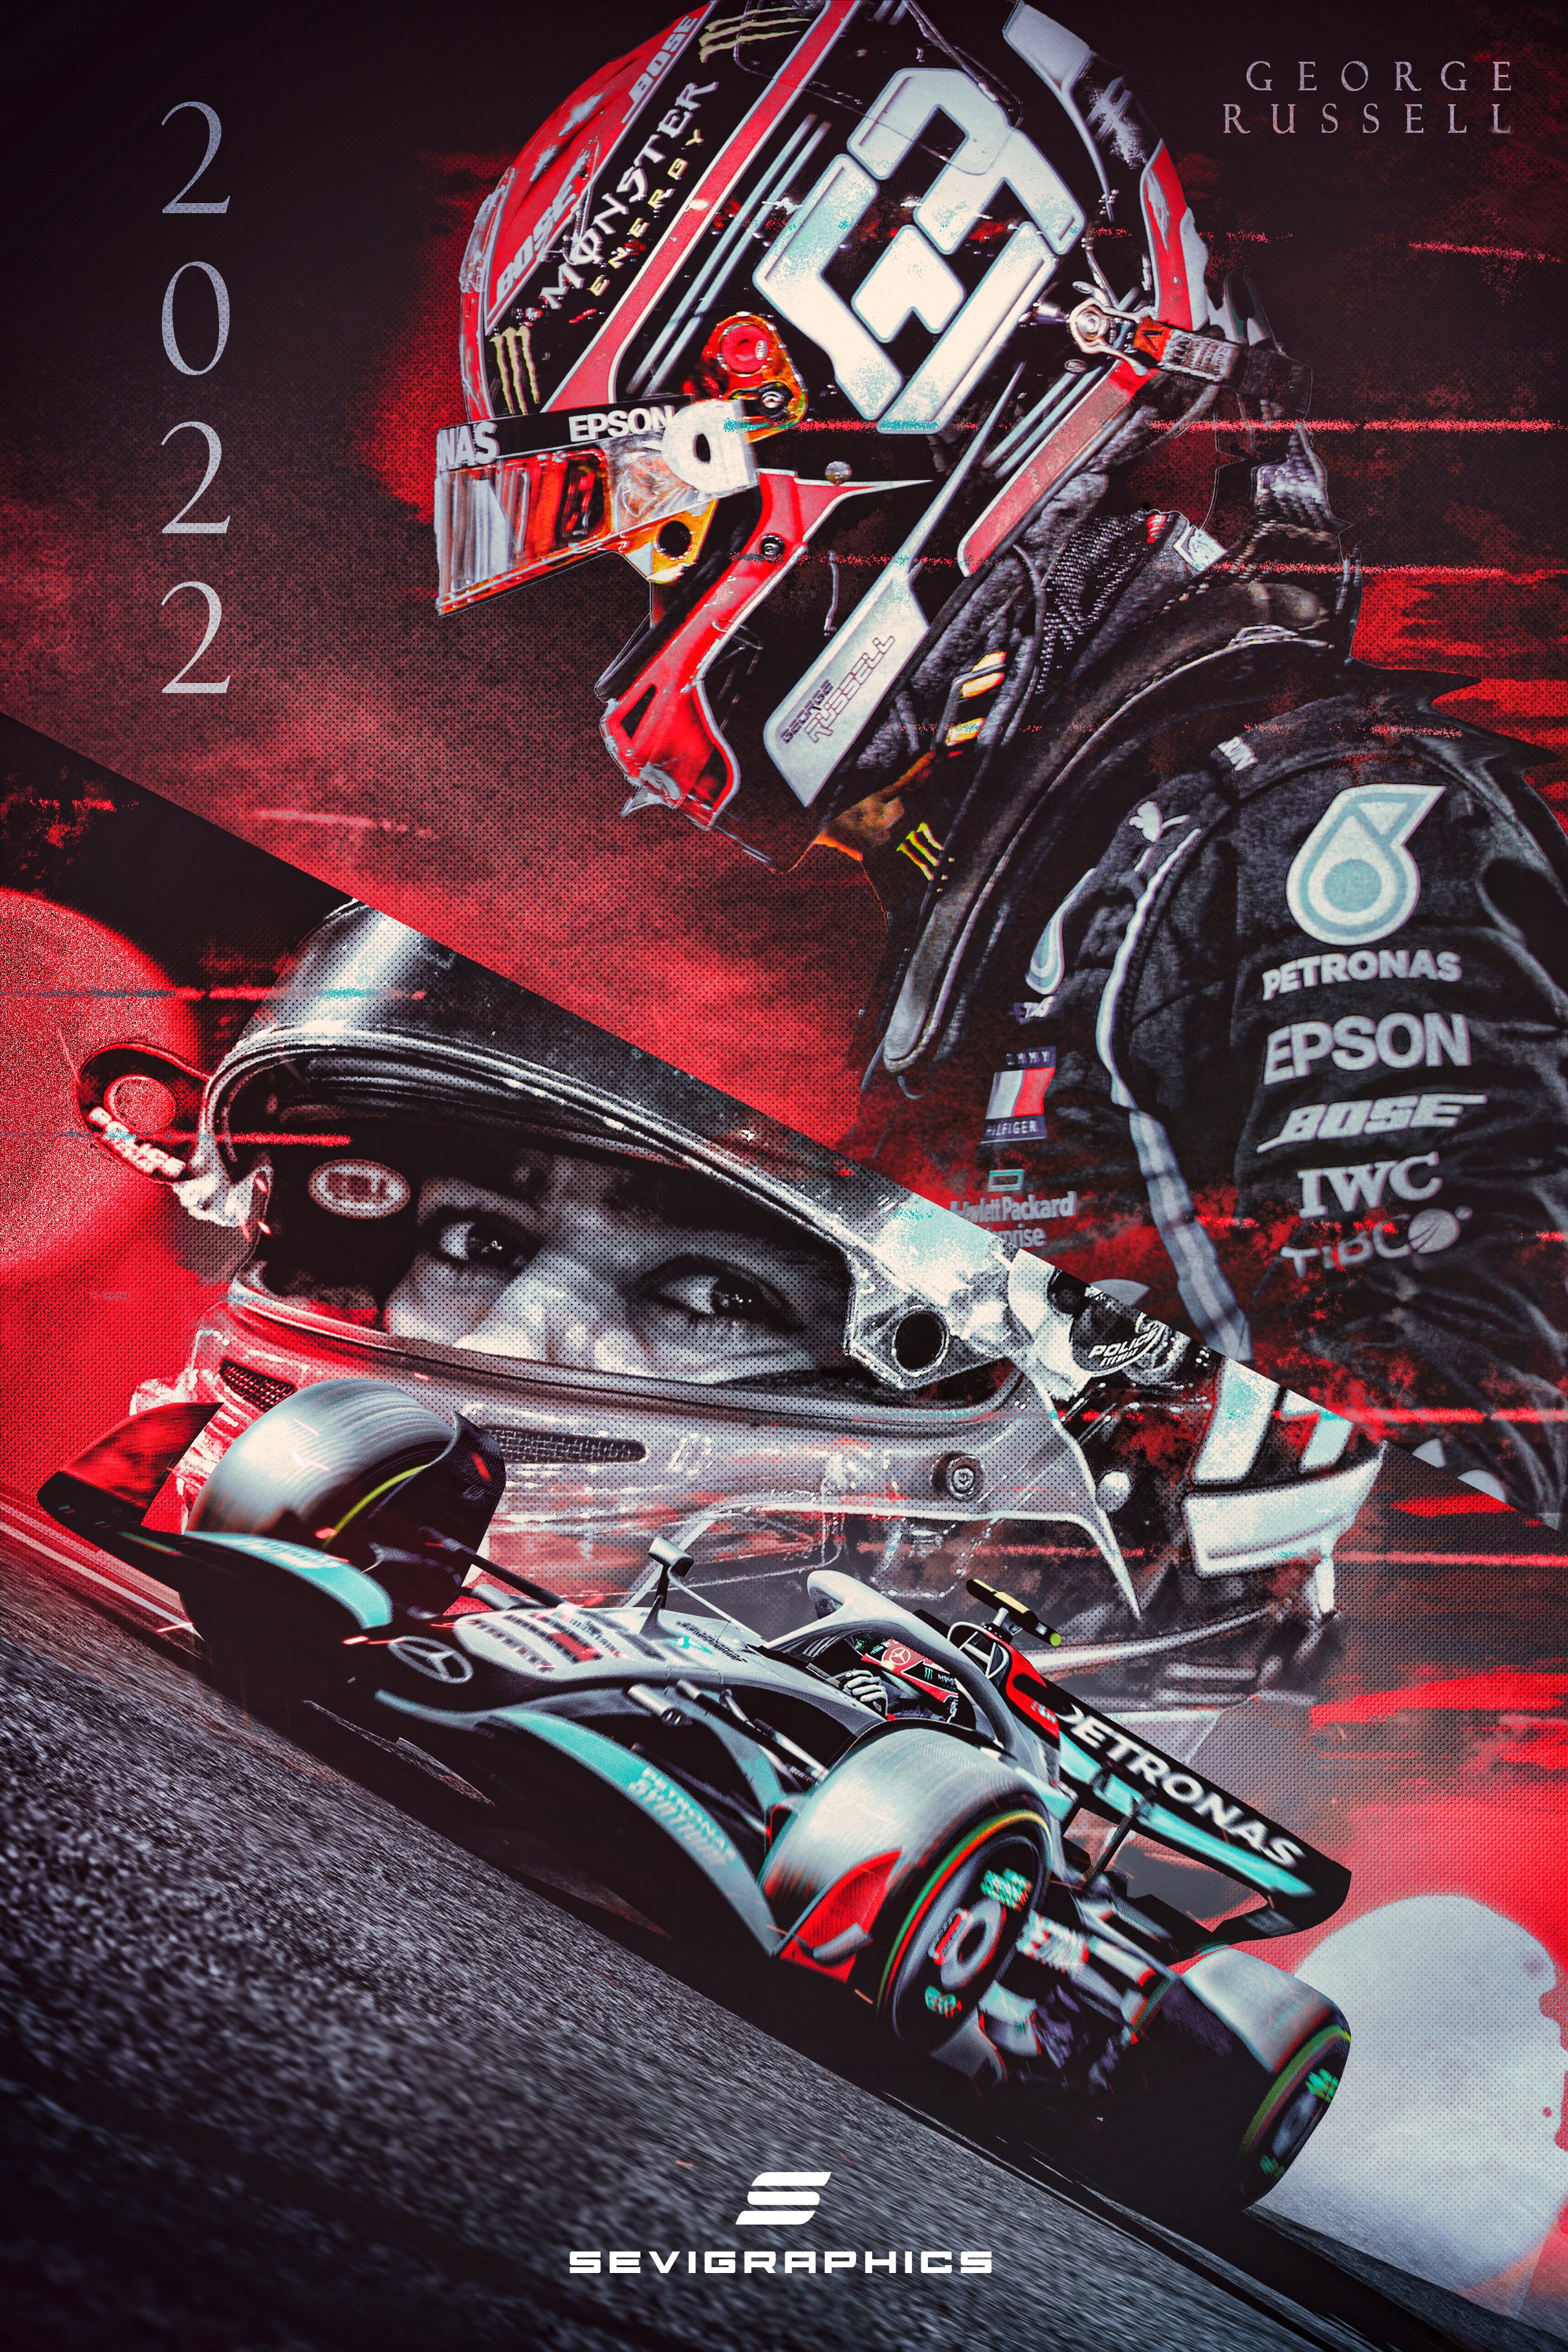 SeviGraphics - Ｍｙ ｔｕｒｎ George Russell x Mercedes 2022 Poster Design 3D Model Car #f1 #f12022 #russell